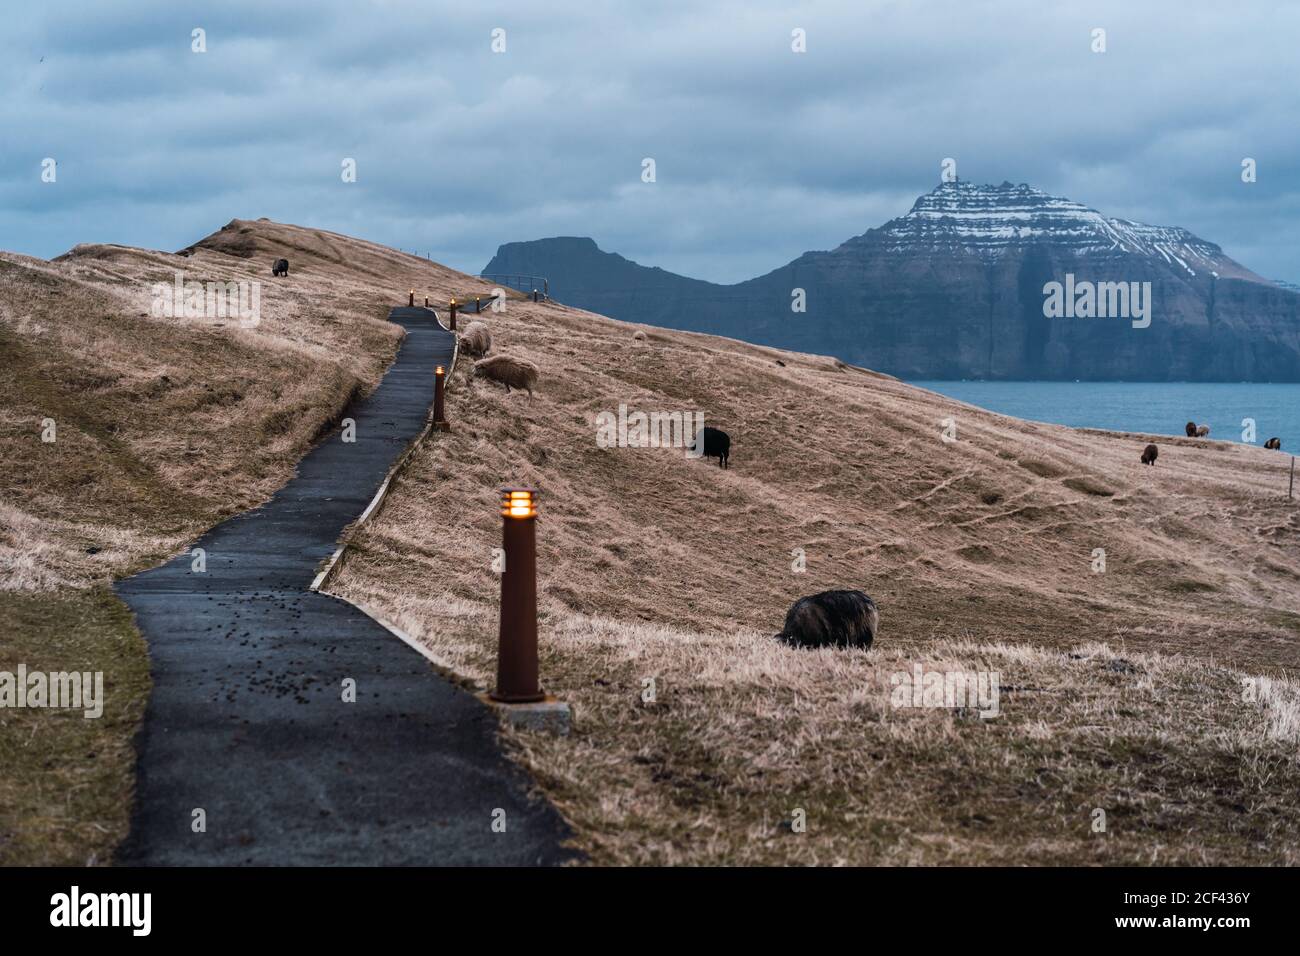 Herd of woolly sheep grazing on dry grass of hilly terrain near road on cloudy day on Faroe Islands Stock Photo